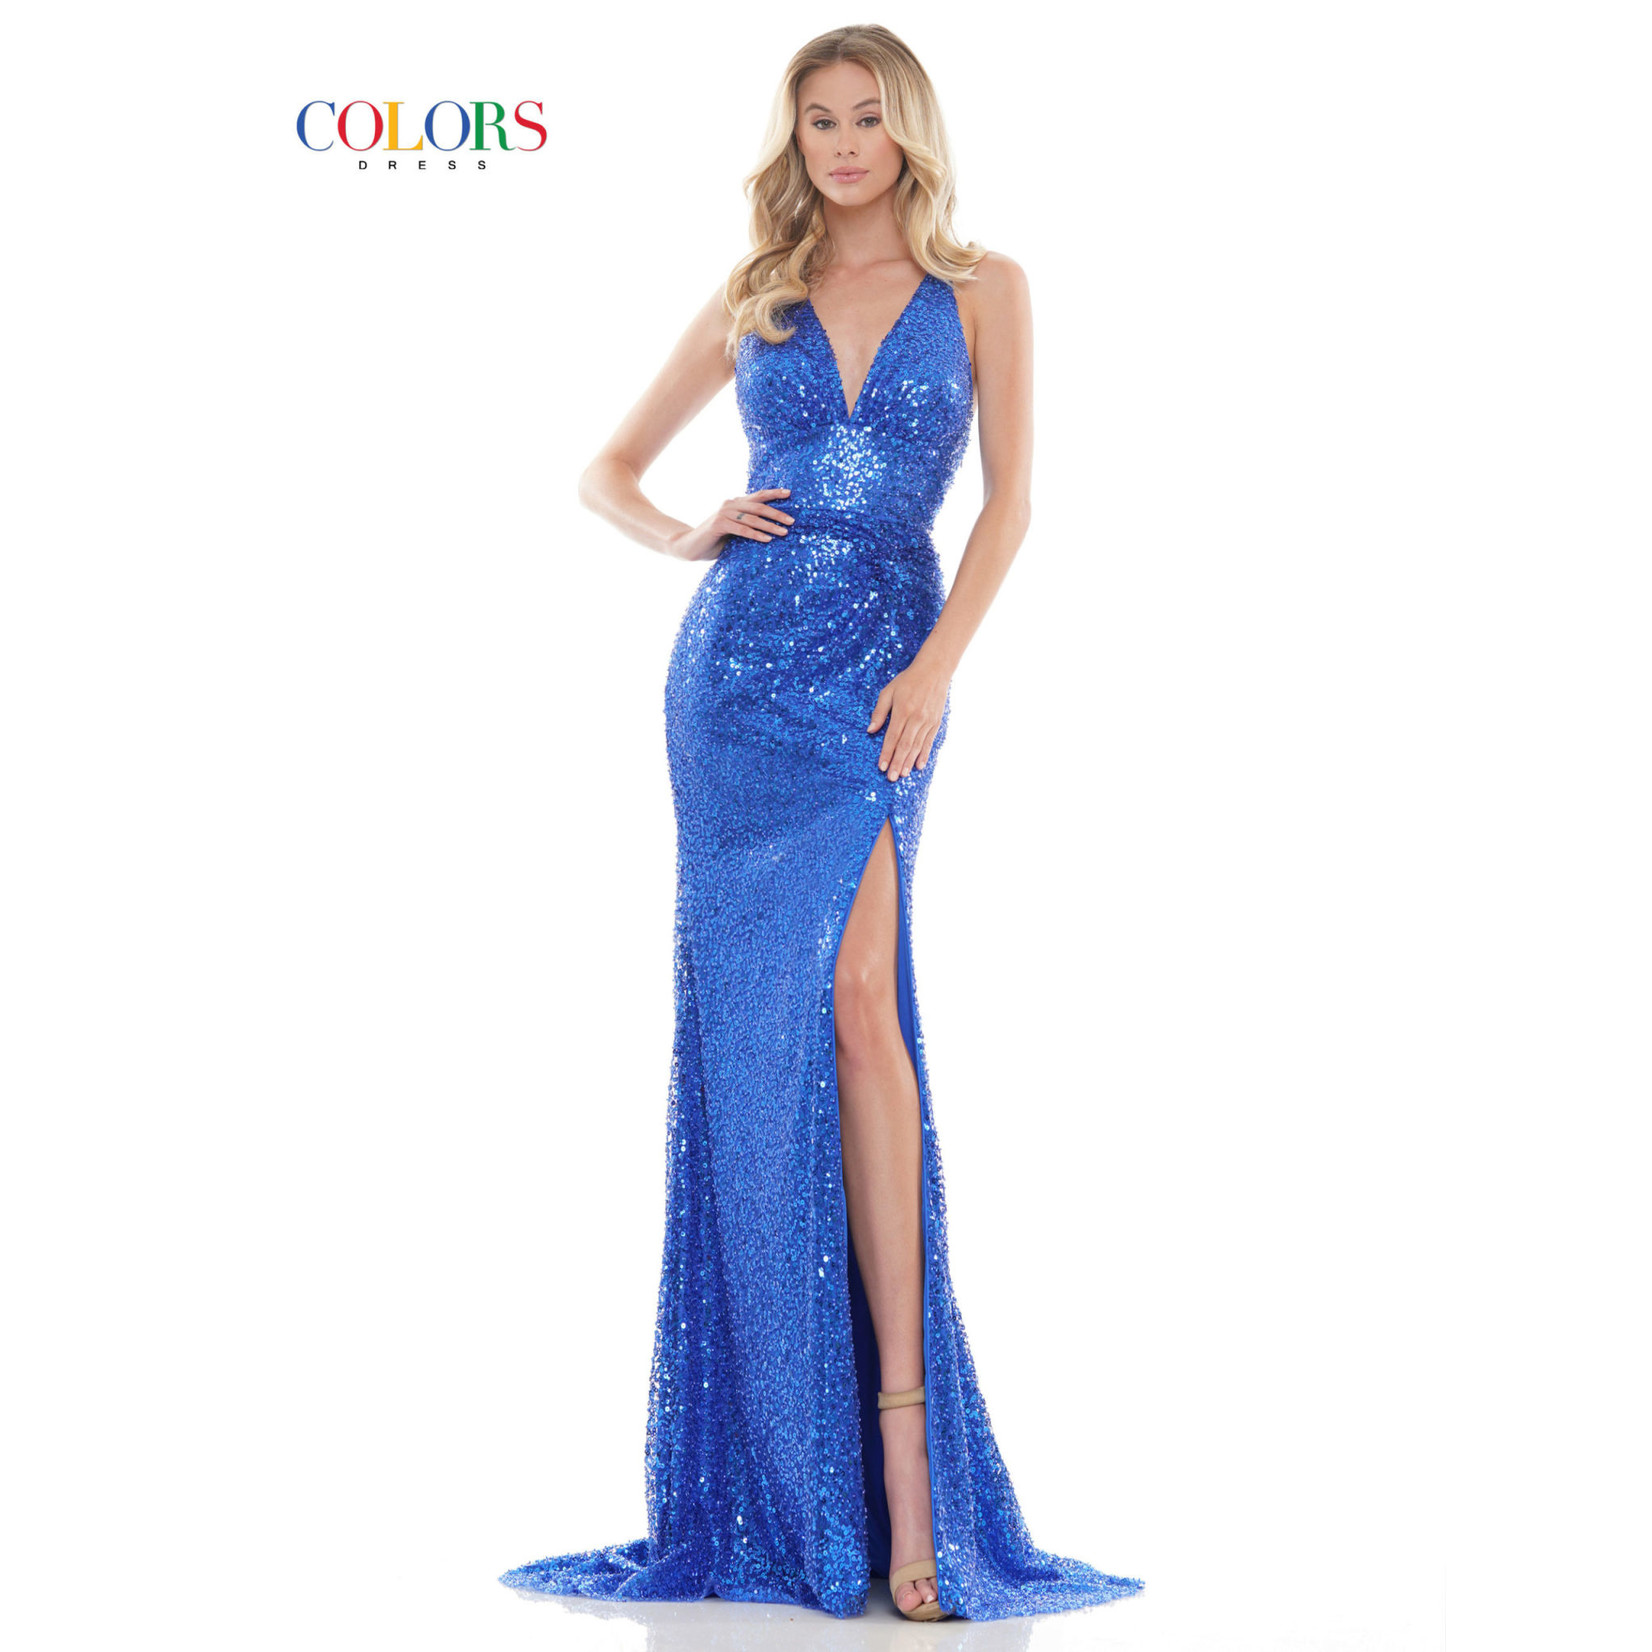 Colors Colors 2702 Strappy Back Sequin Gown